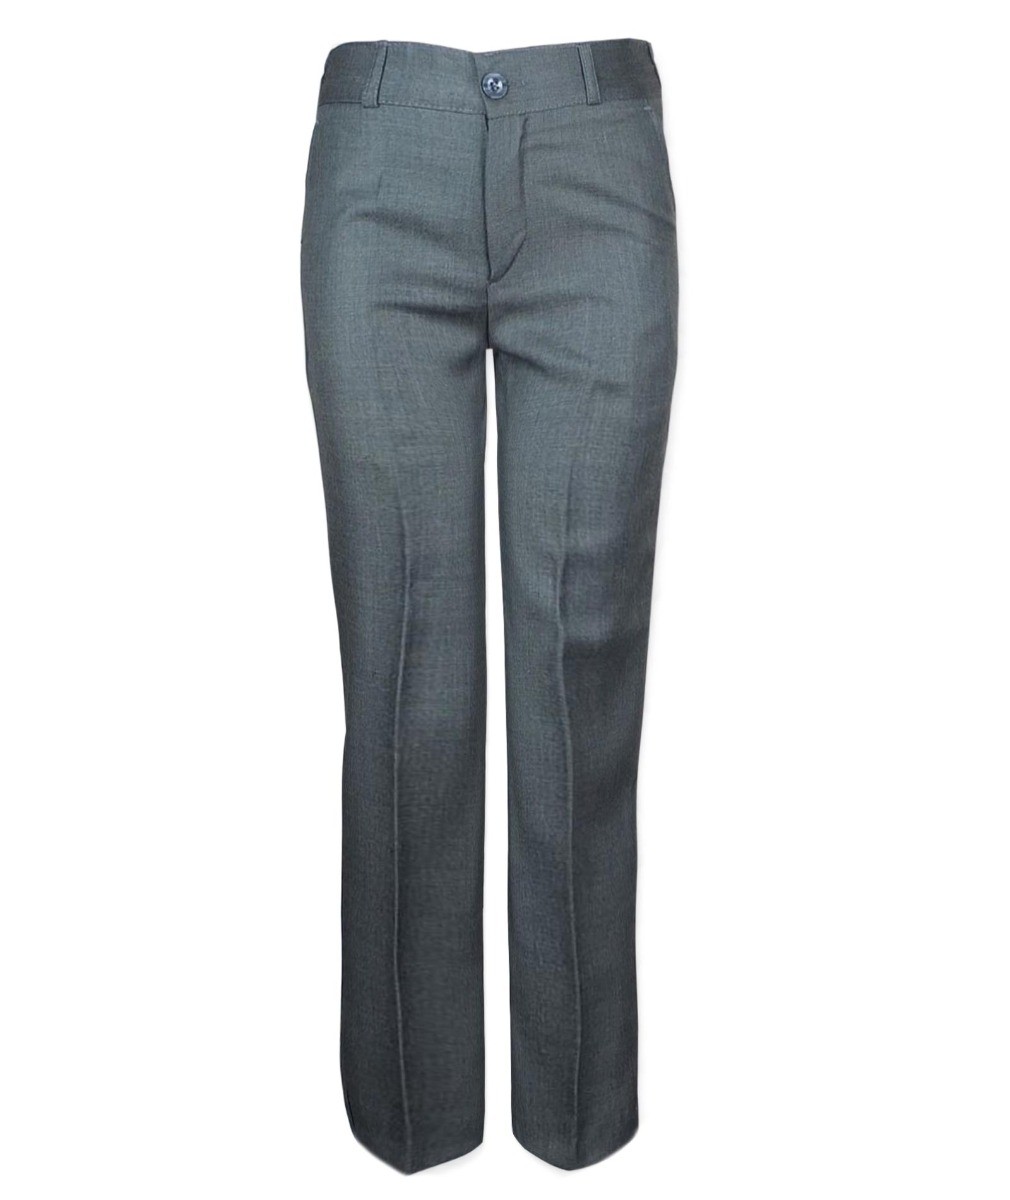 Boys Formal  Suit Trousers - Grey